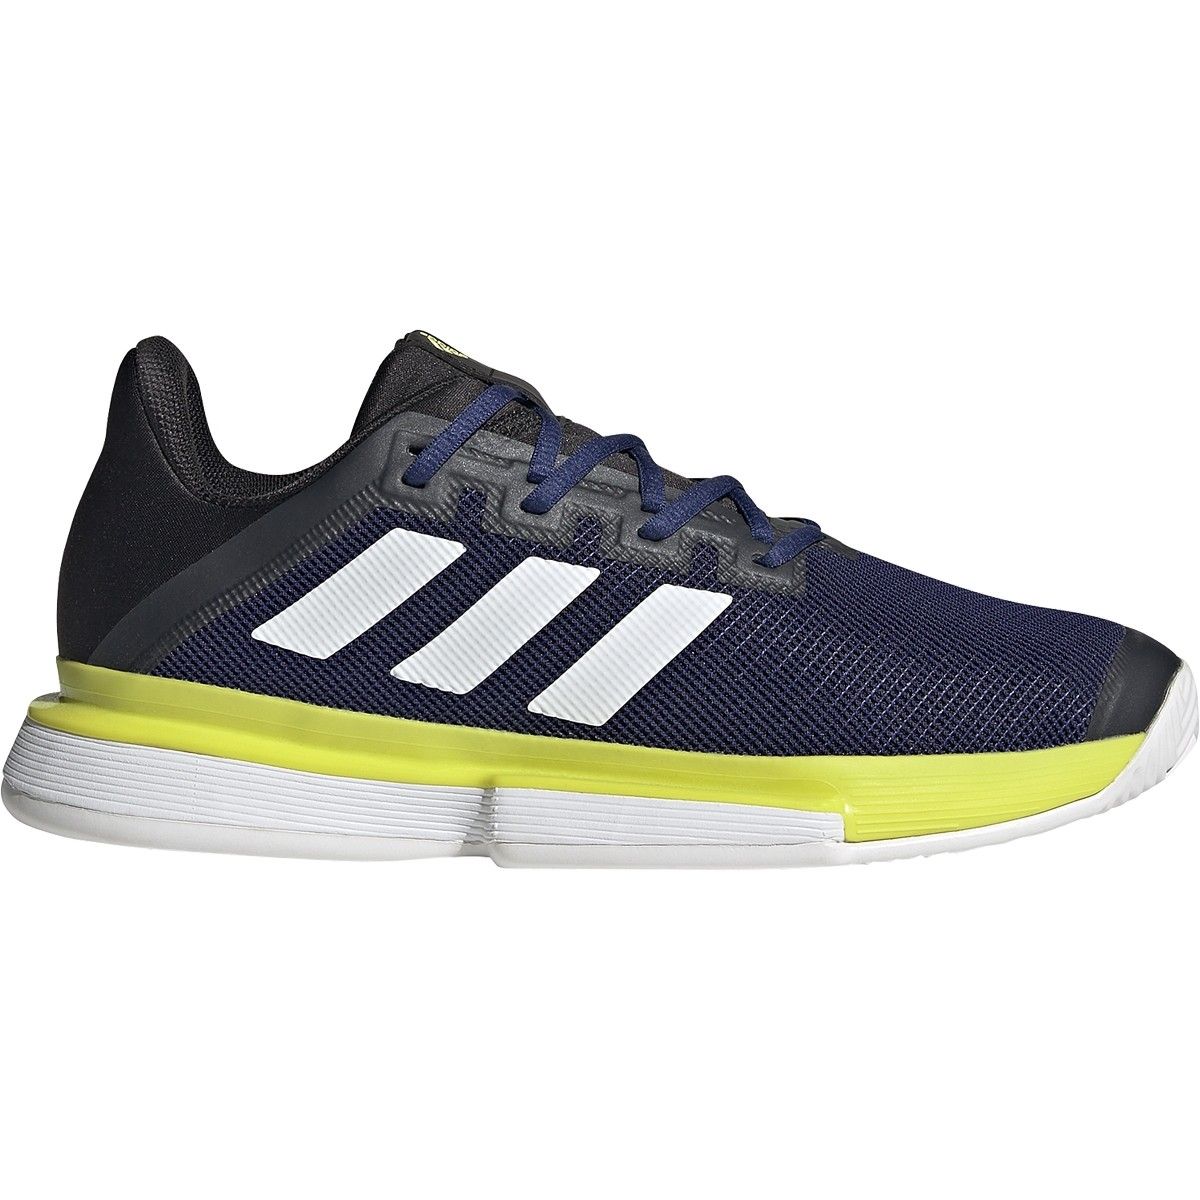 adidas SoleMatch Bounce Men's Tennis Shoes GY7645